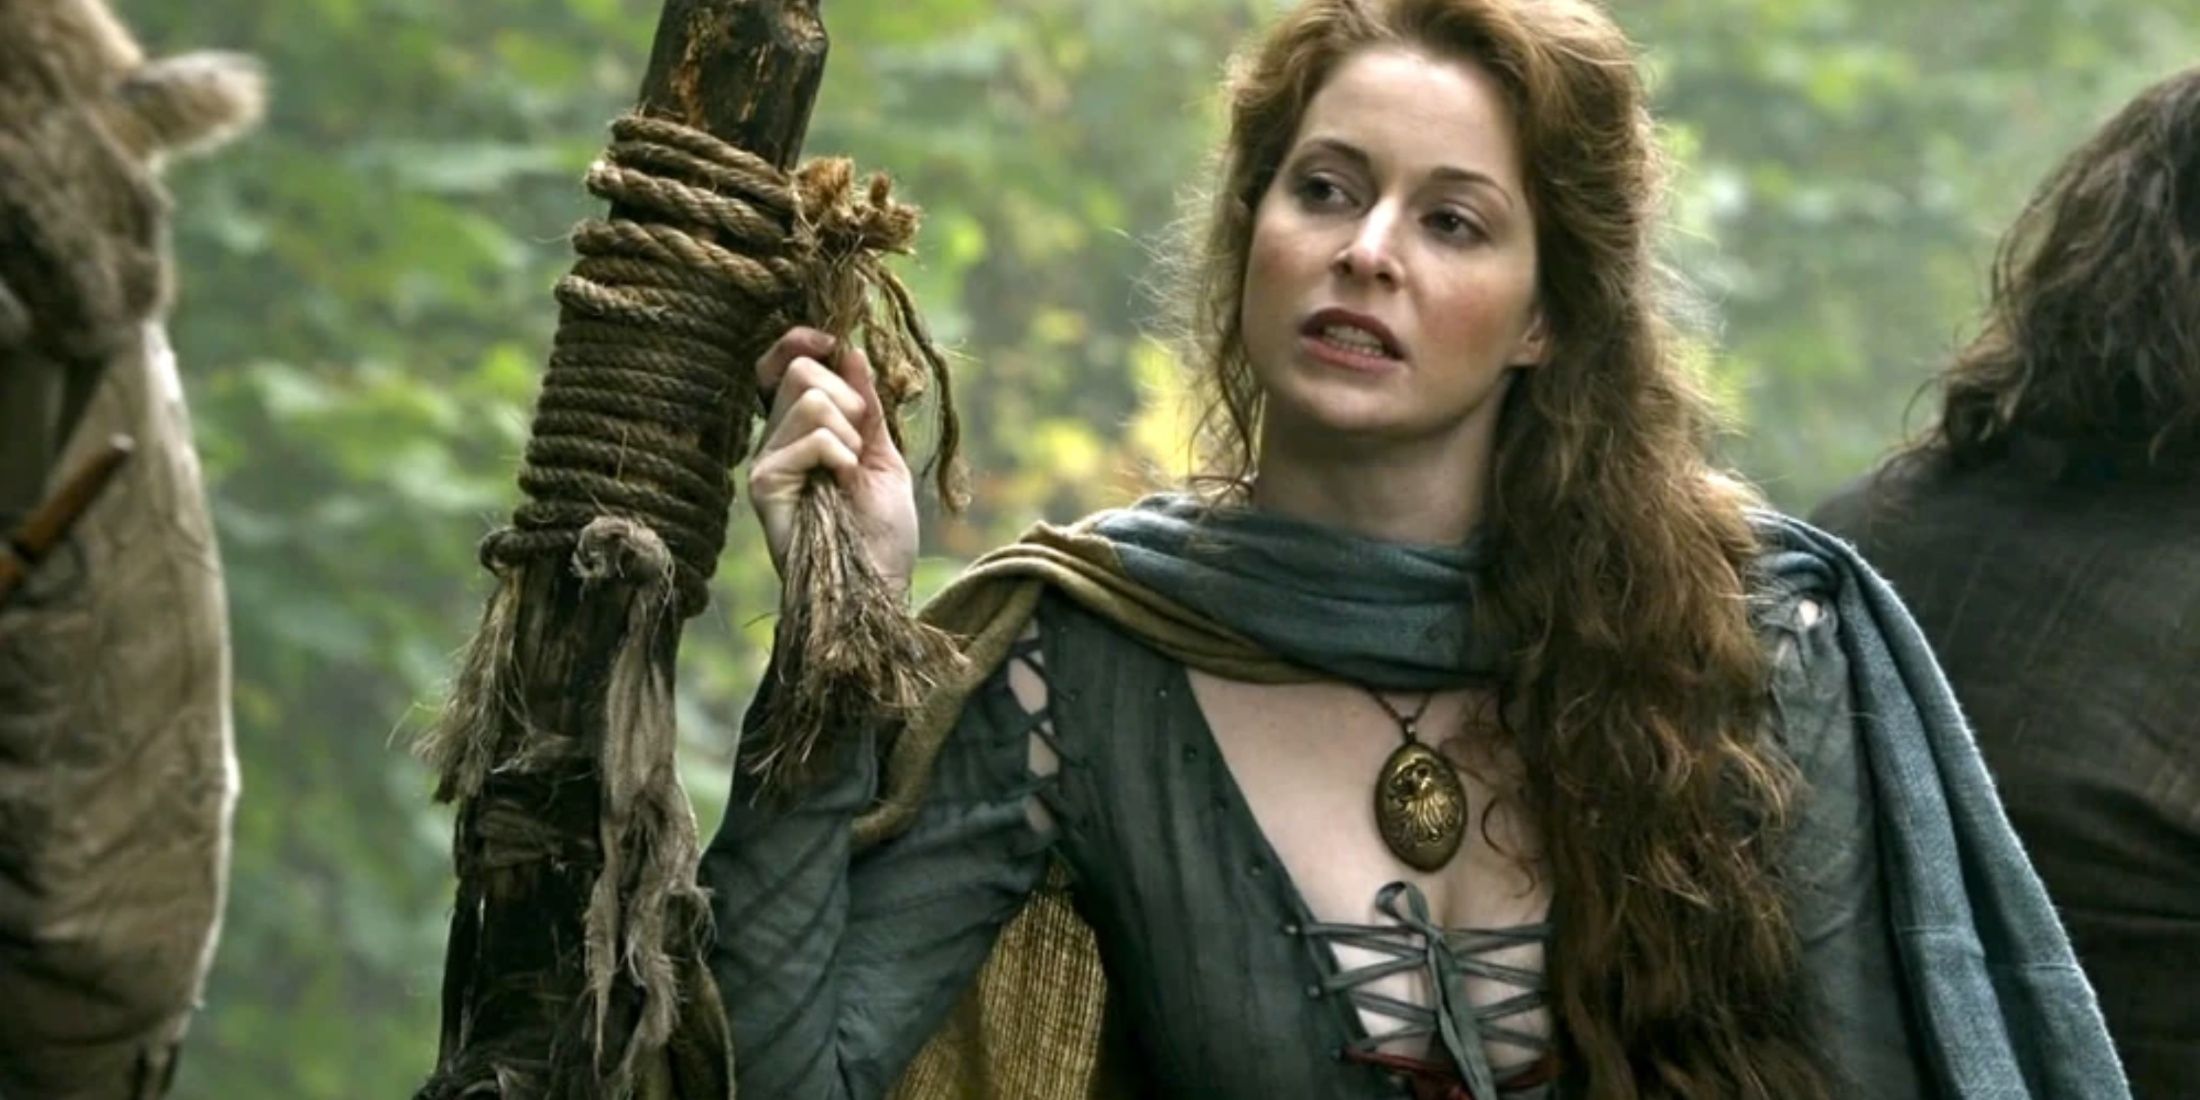 Esmé Bianco as Ros in Game of Thrones